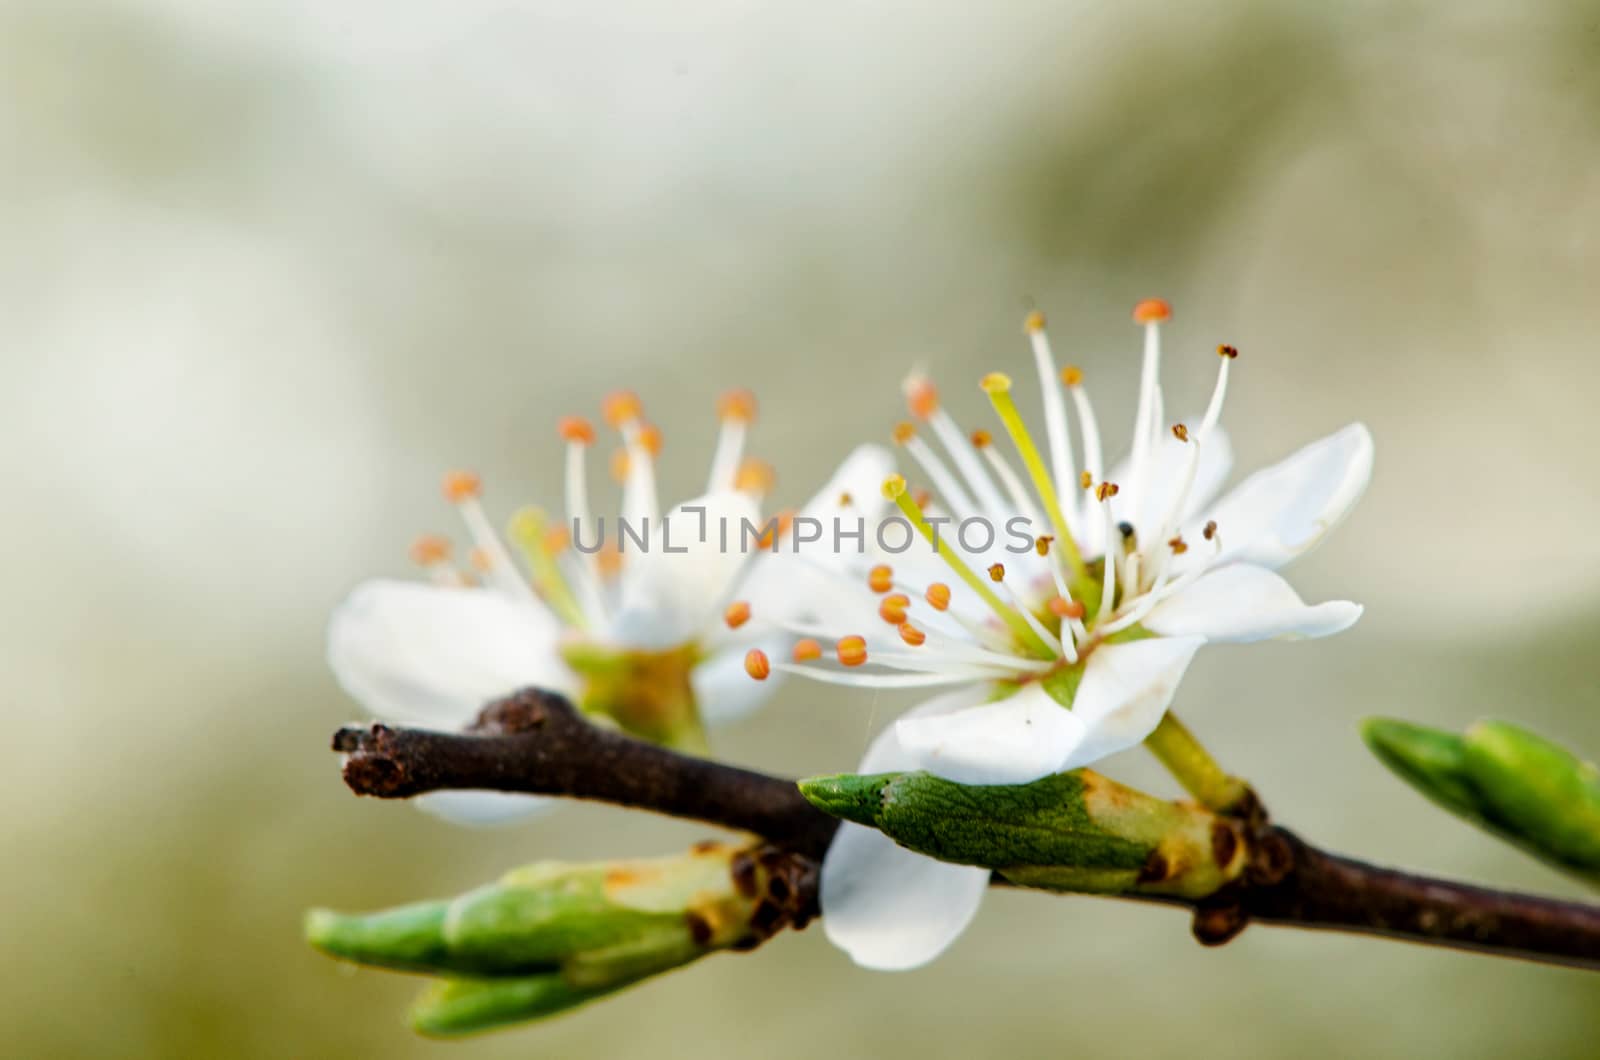 Tree branch with several white yellow blooms.